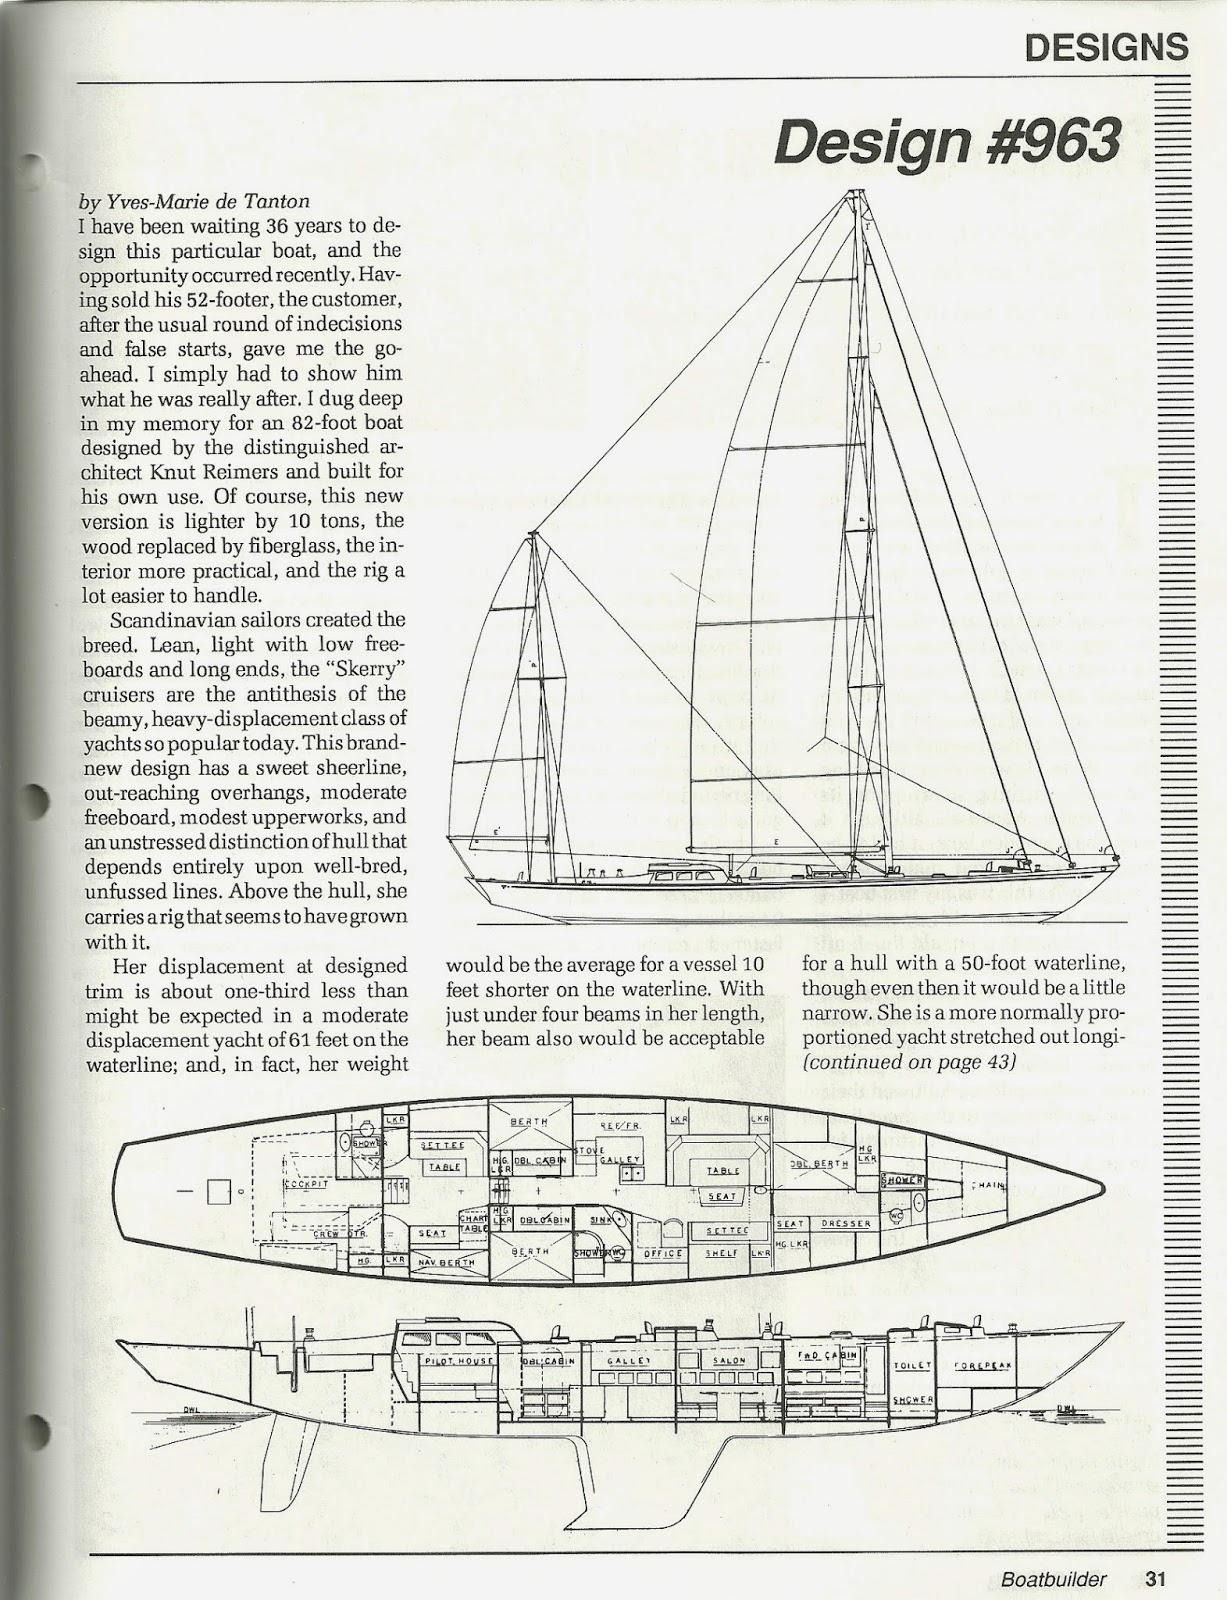 Boat Plans For A Chesapeake Deadrise | April in Newport | Download Boat Plans